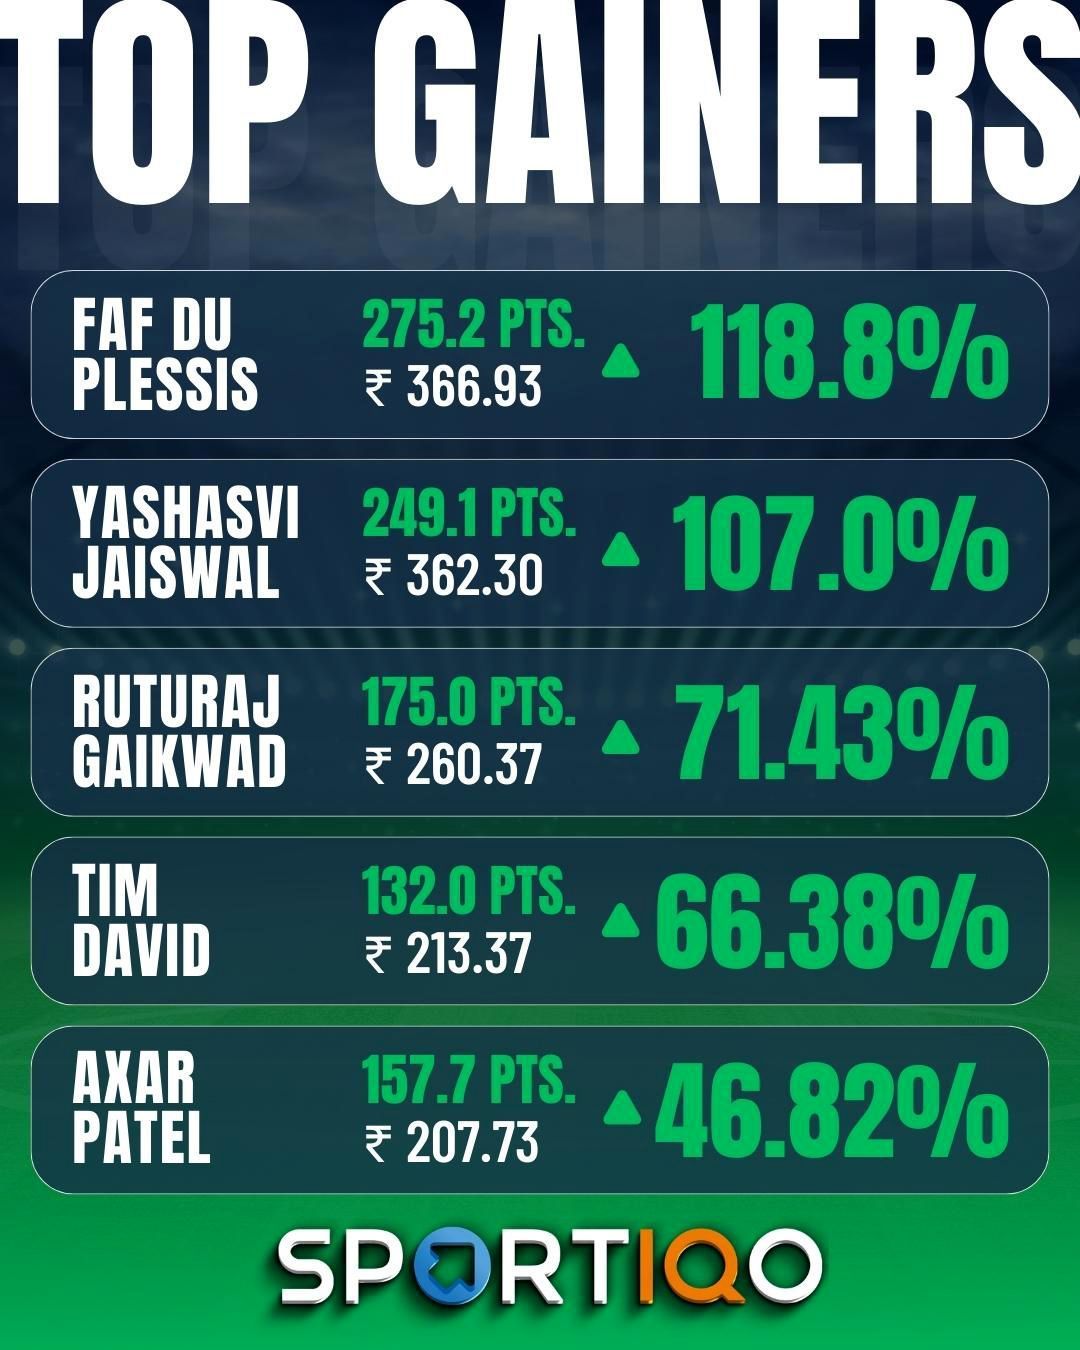 Du Plessis&#039; and Jaiswal&#039;s good form with the bat continued as they lead the top gainers for the week.